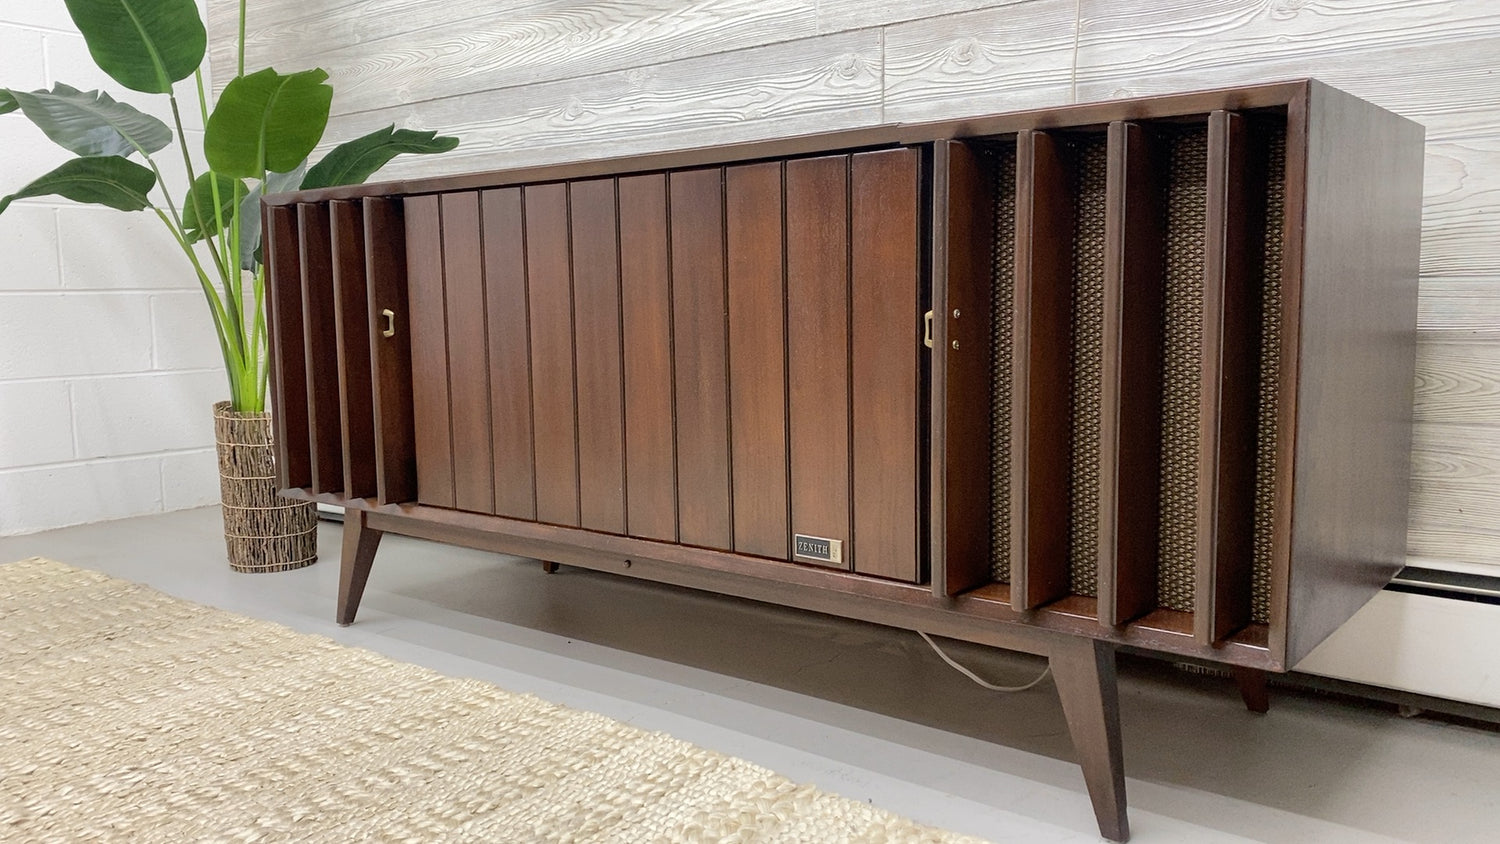 60s Mid Century ZENITH Louver Stereo Console Record Player Changer AM FM Bluetooth The Vintedge Co.